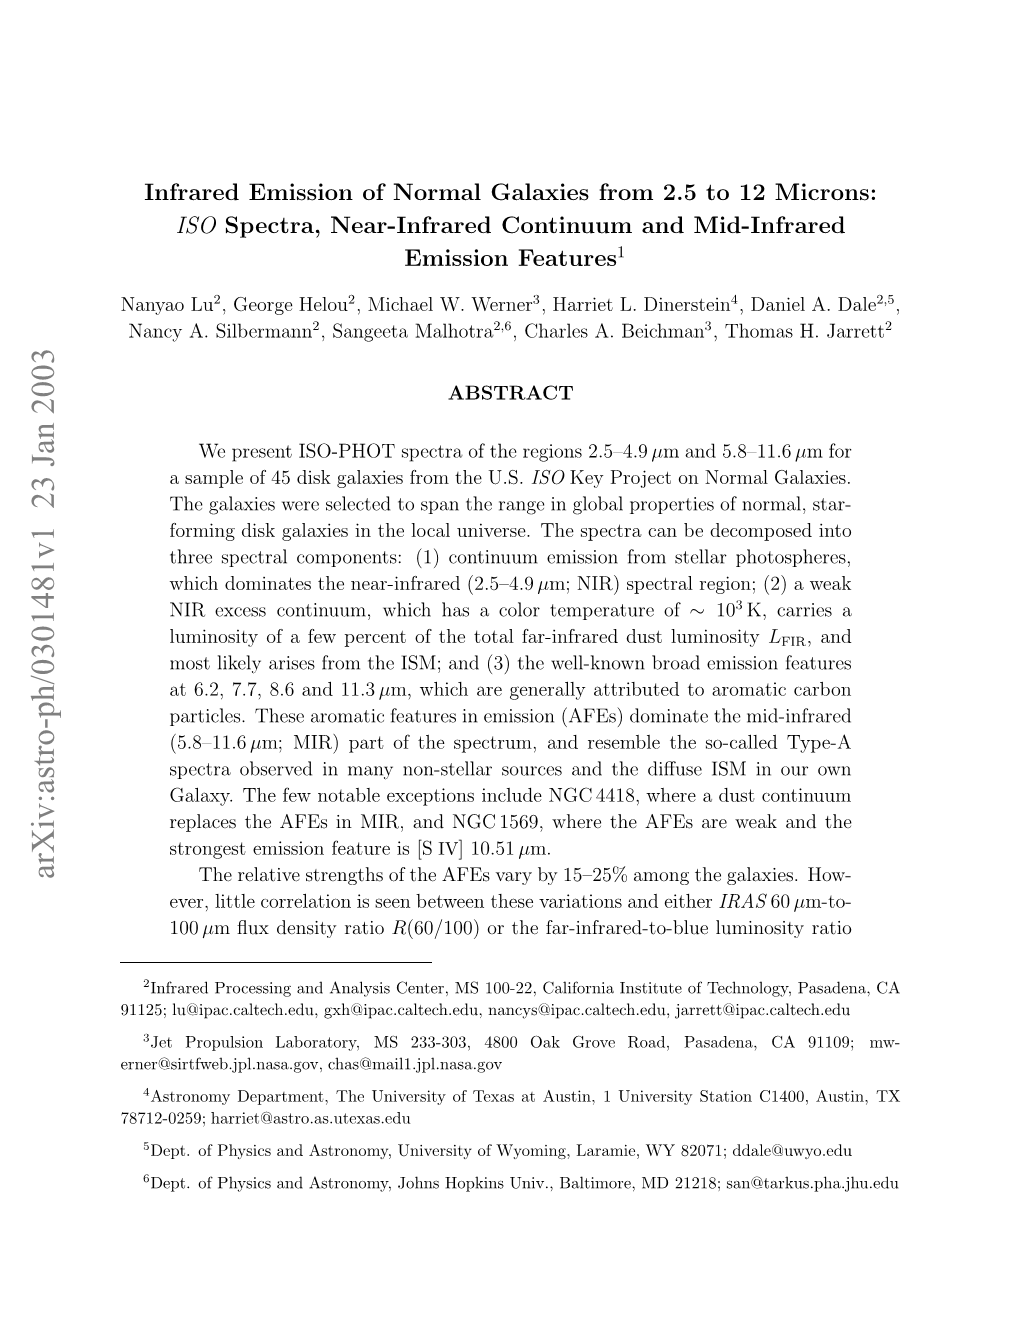 Infrared Emission of Normal Galaxies from 2.5 to 12 Microns: ISO Spectra, Near-Infrared Continuum and Mid-Infrared Emission Features